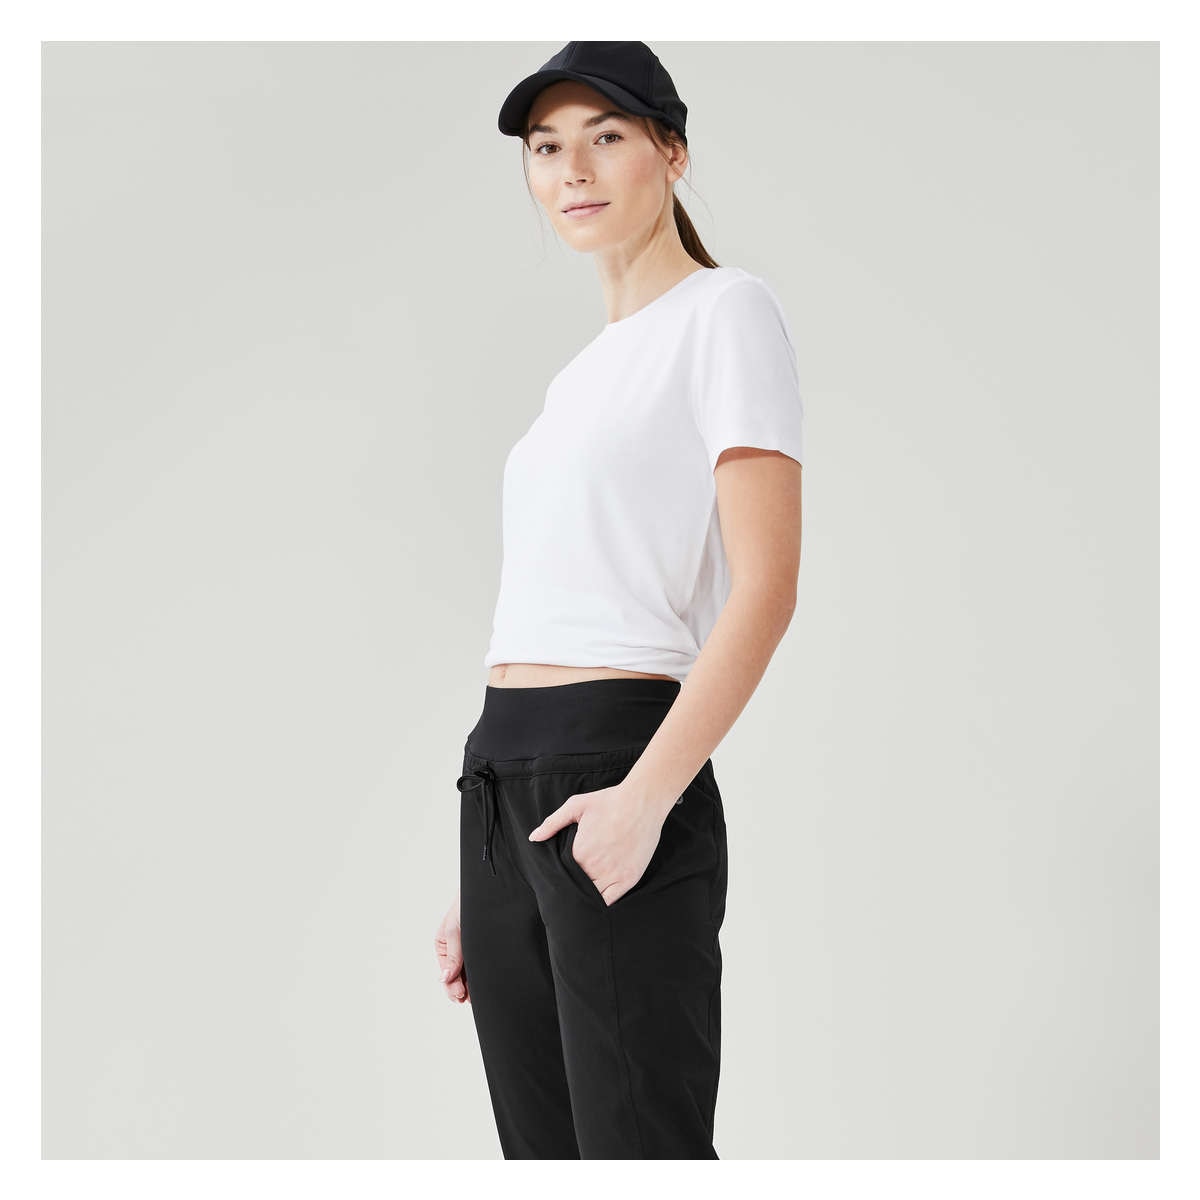 Industry Line Women's 5-Pocket STRETCH Jogger Chef Pants